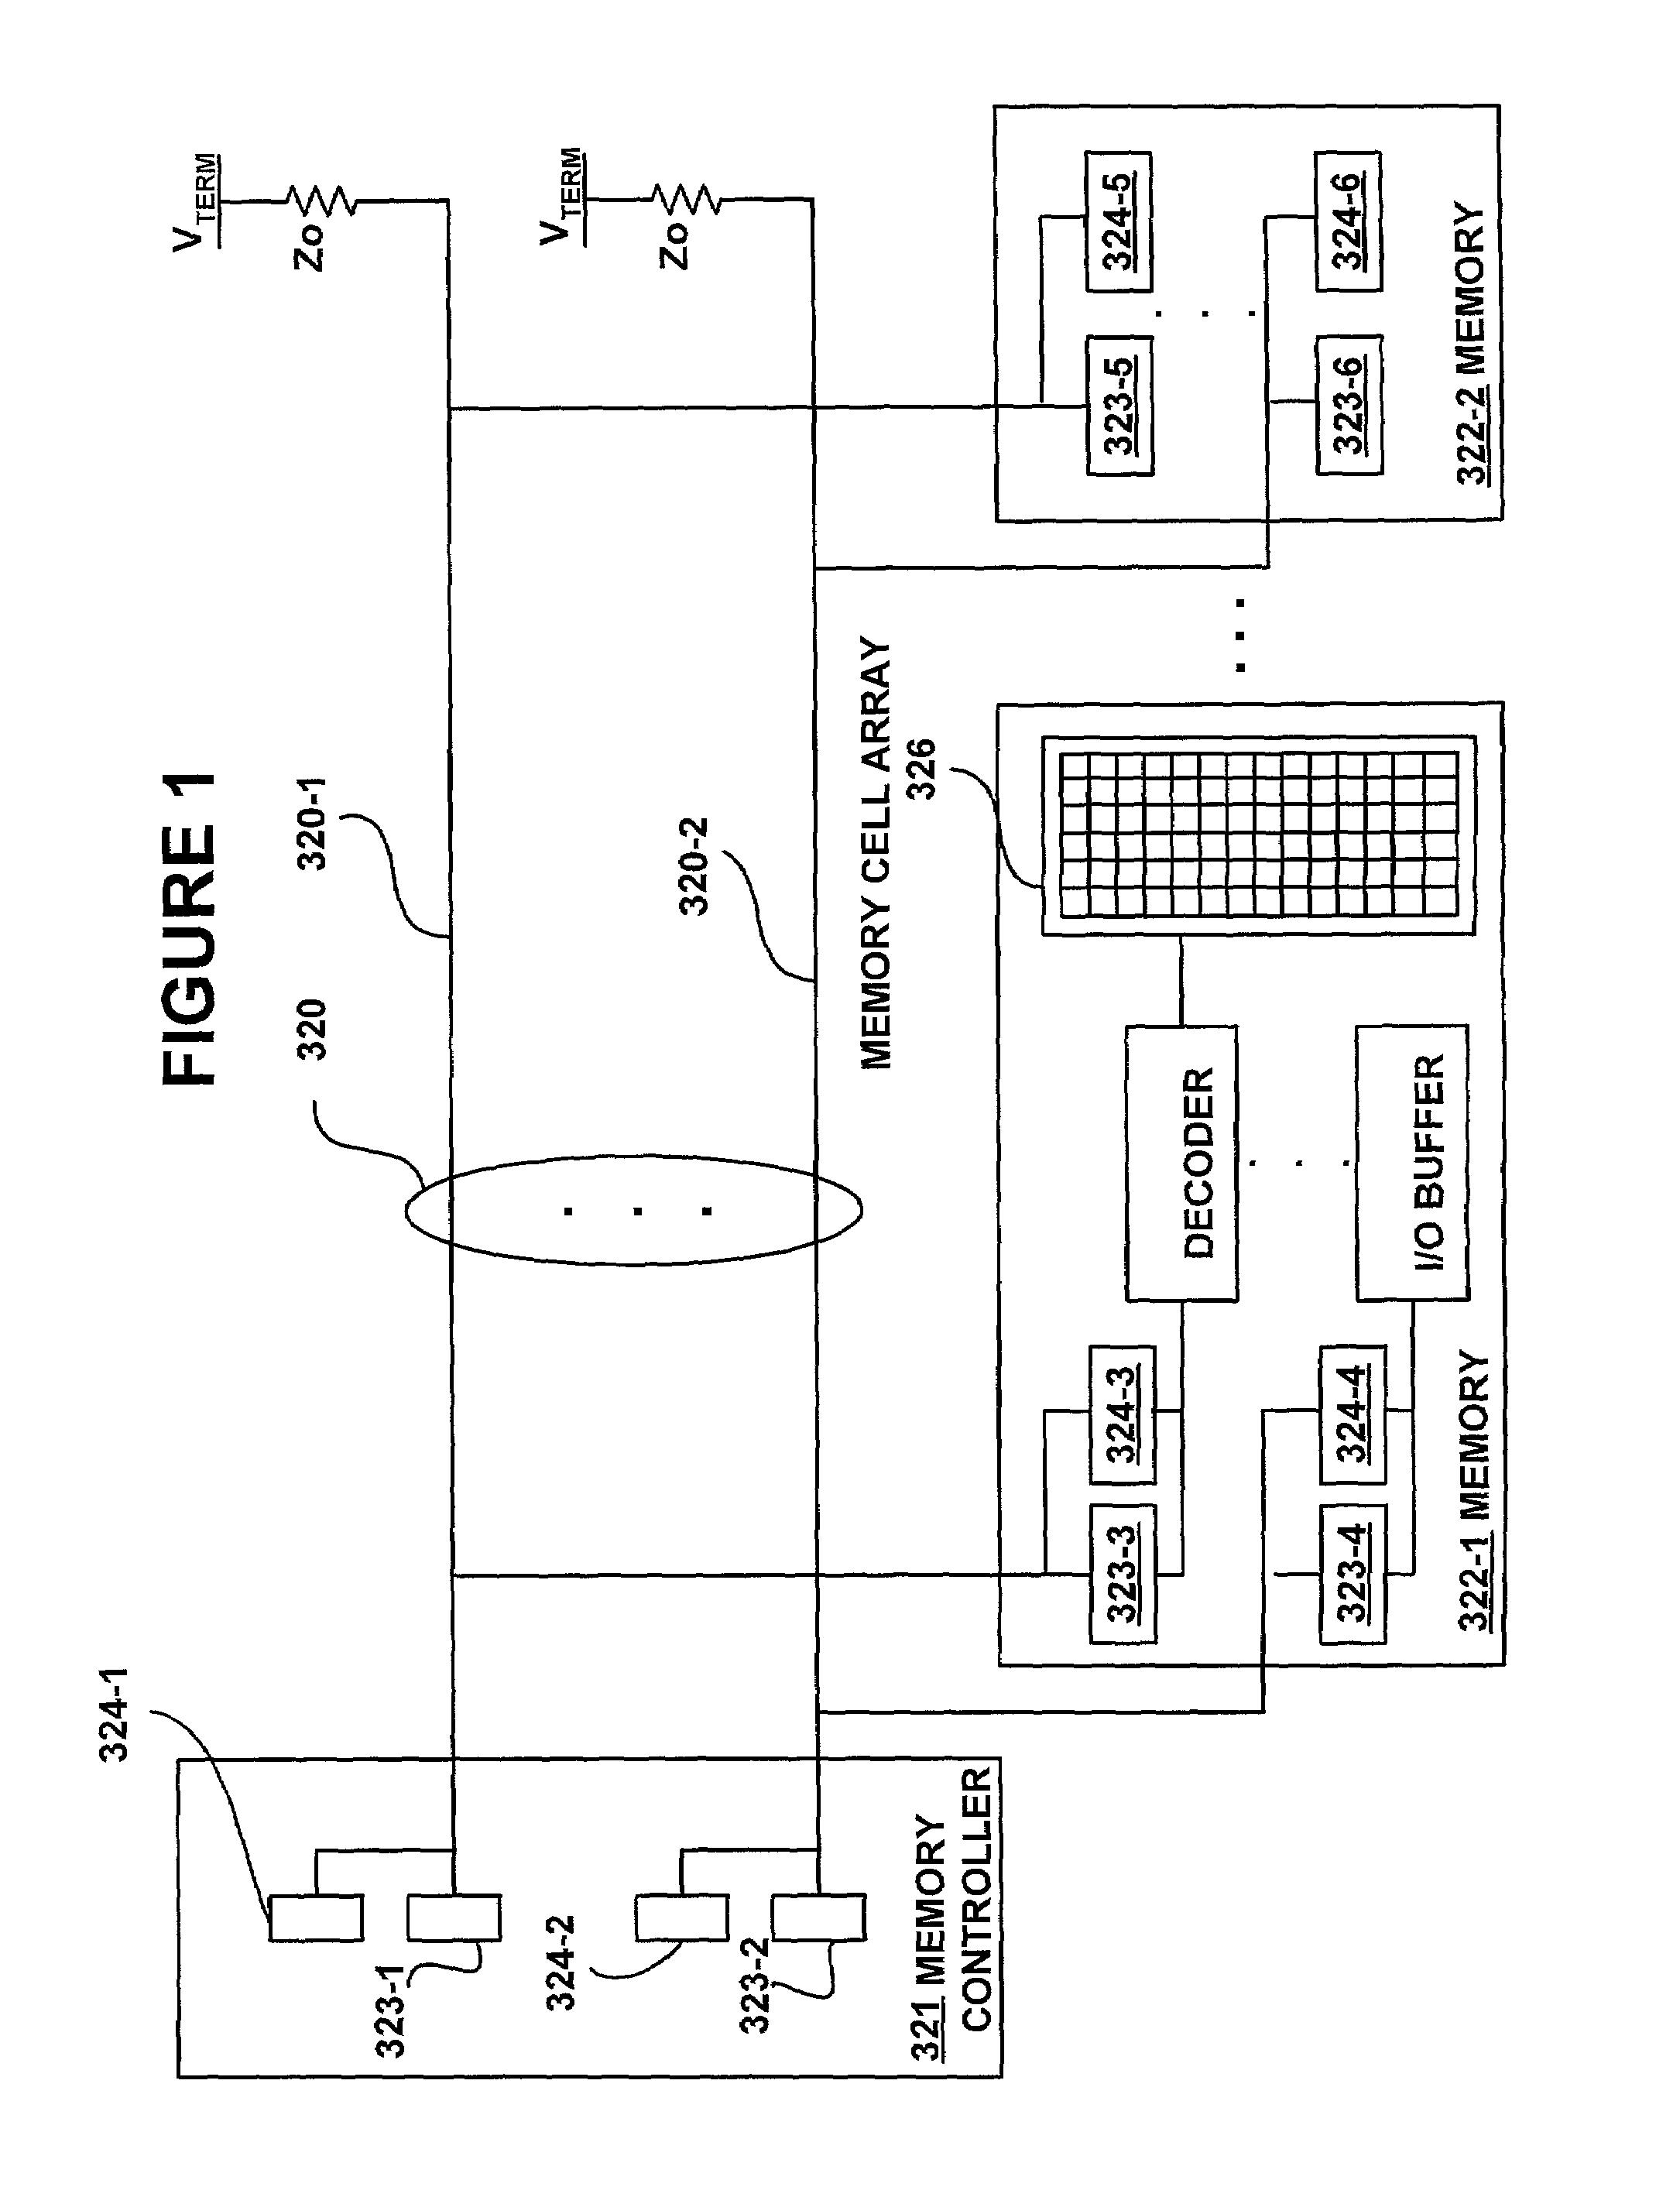 Method and apparatus for generating multi-level reference voltage in systems using equalization or crosstalk cancellation